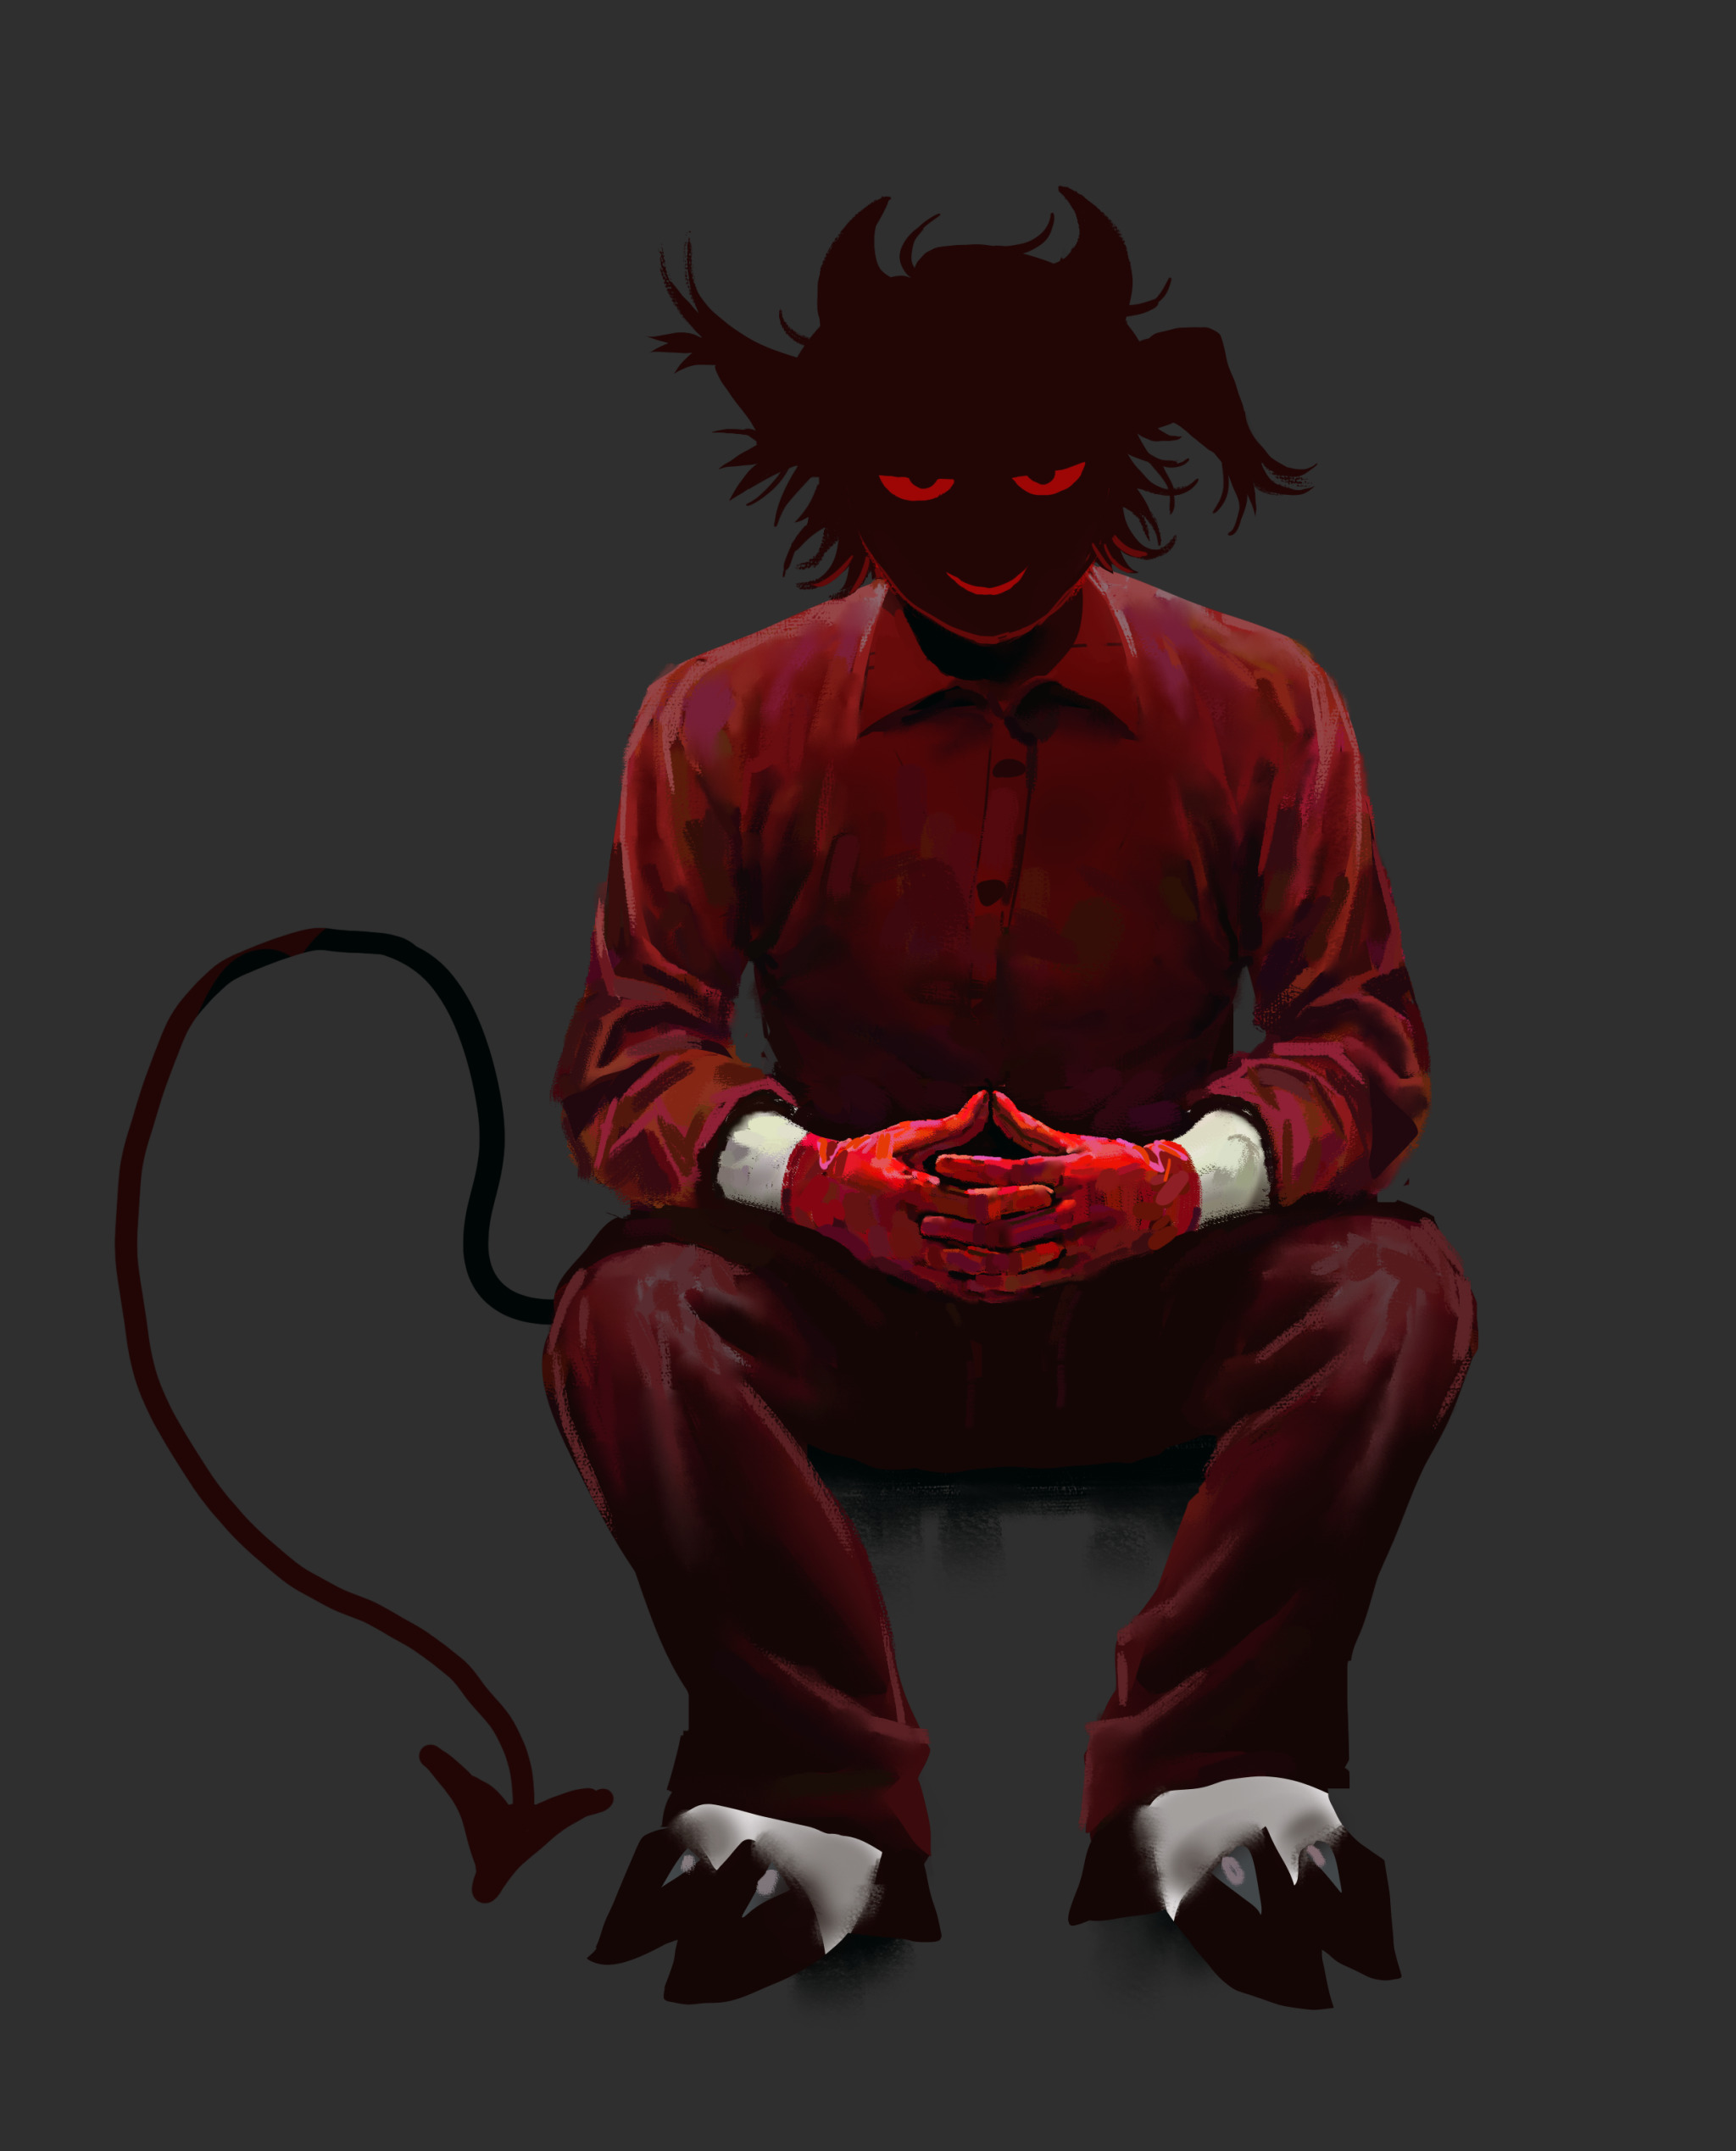 Anthropomorphic goat dressed in a red shirt, pants, and gloves, sitting down.